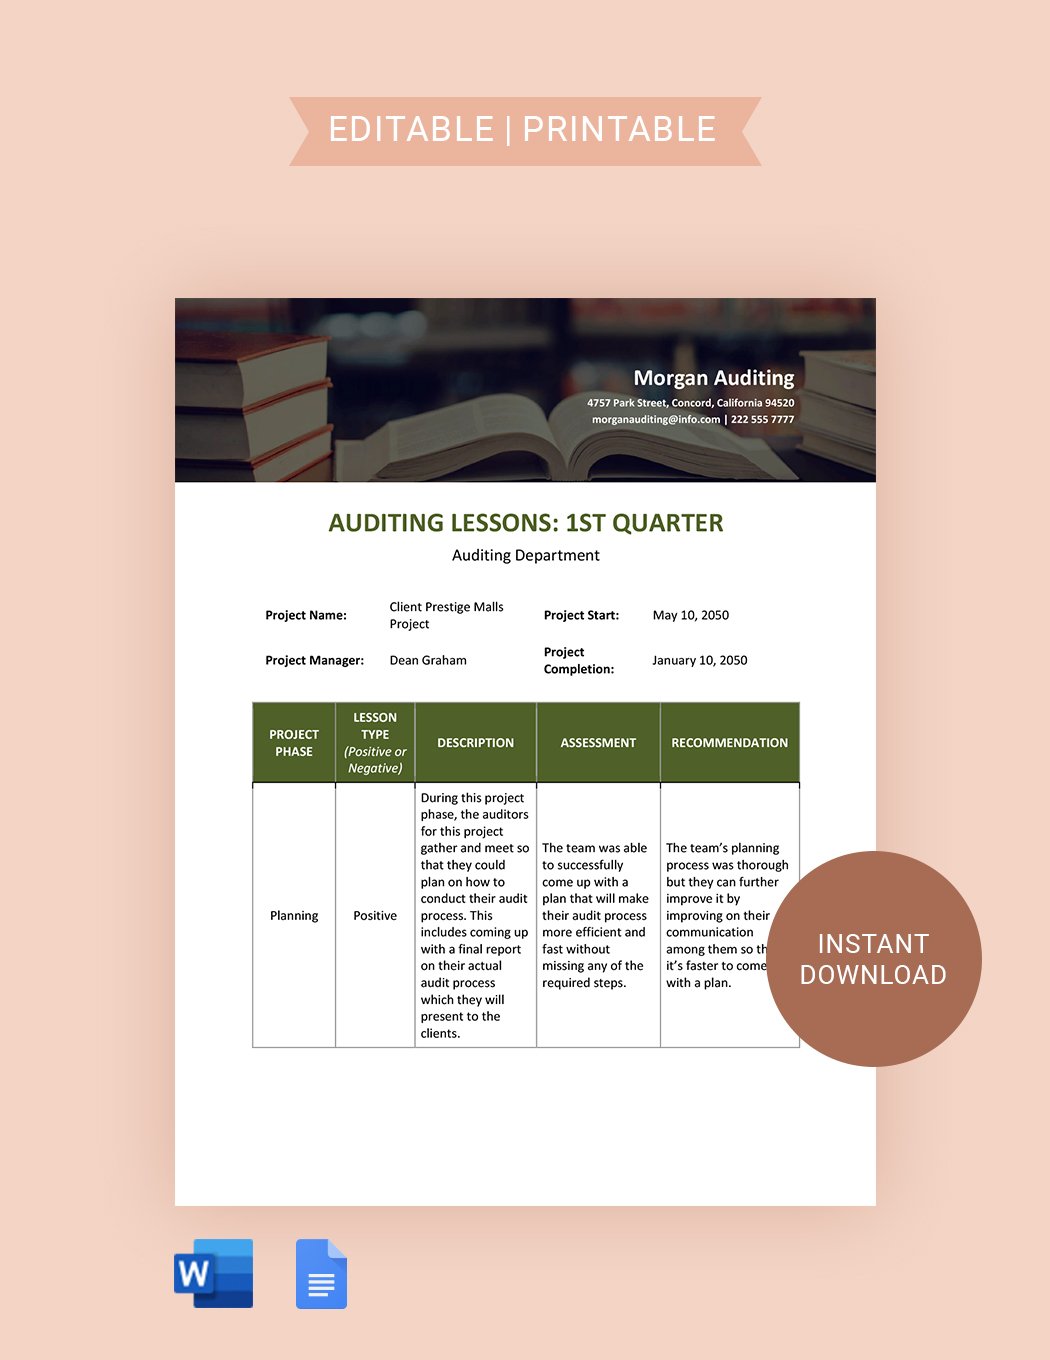 Audit Lessons Learned Template in Word, Google Docs